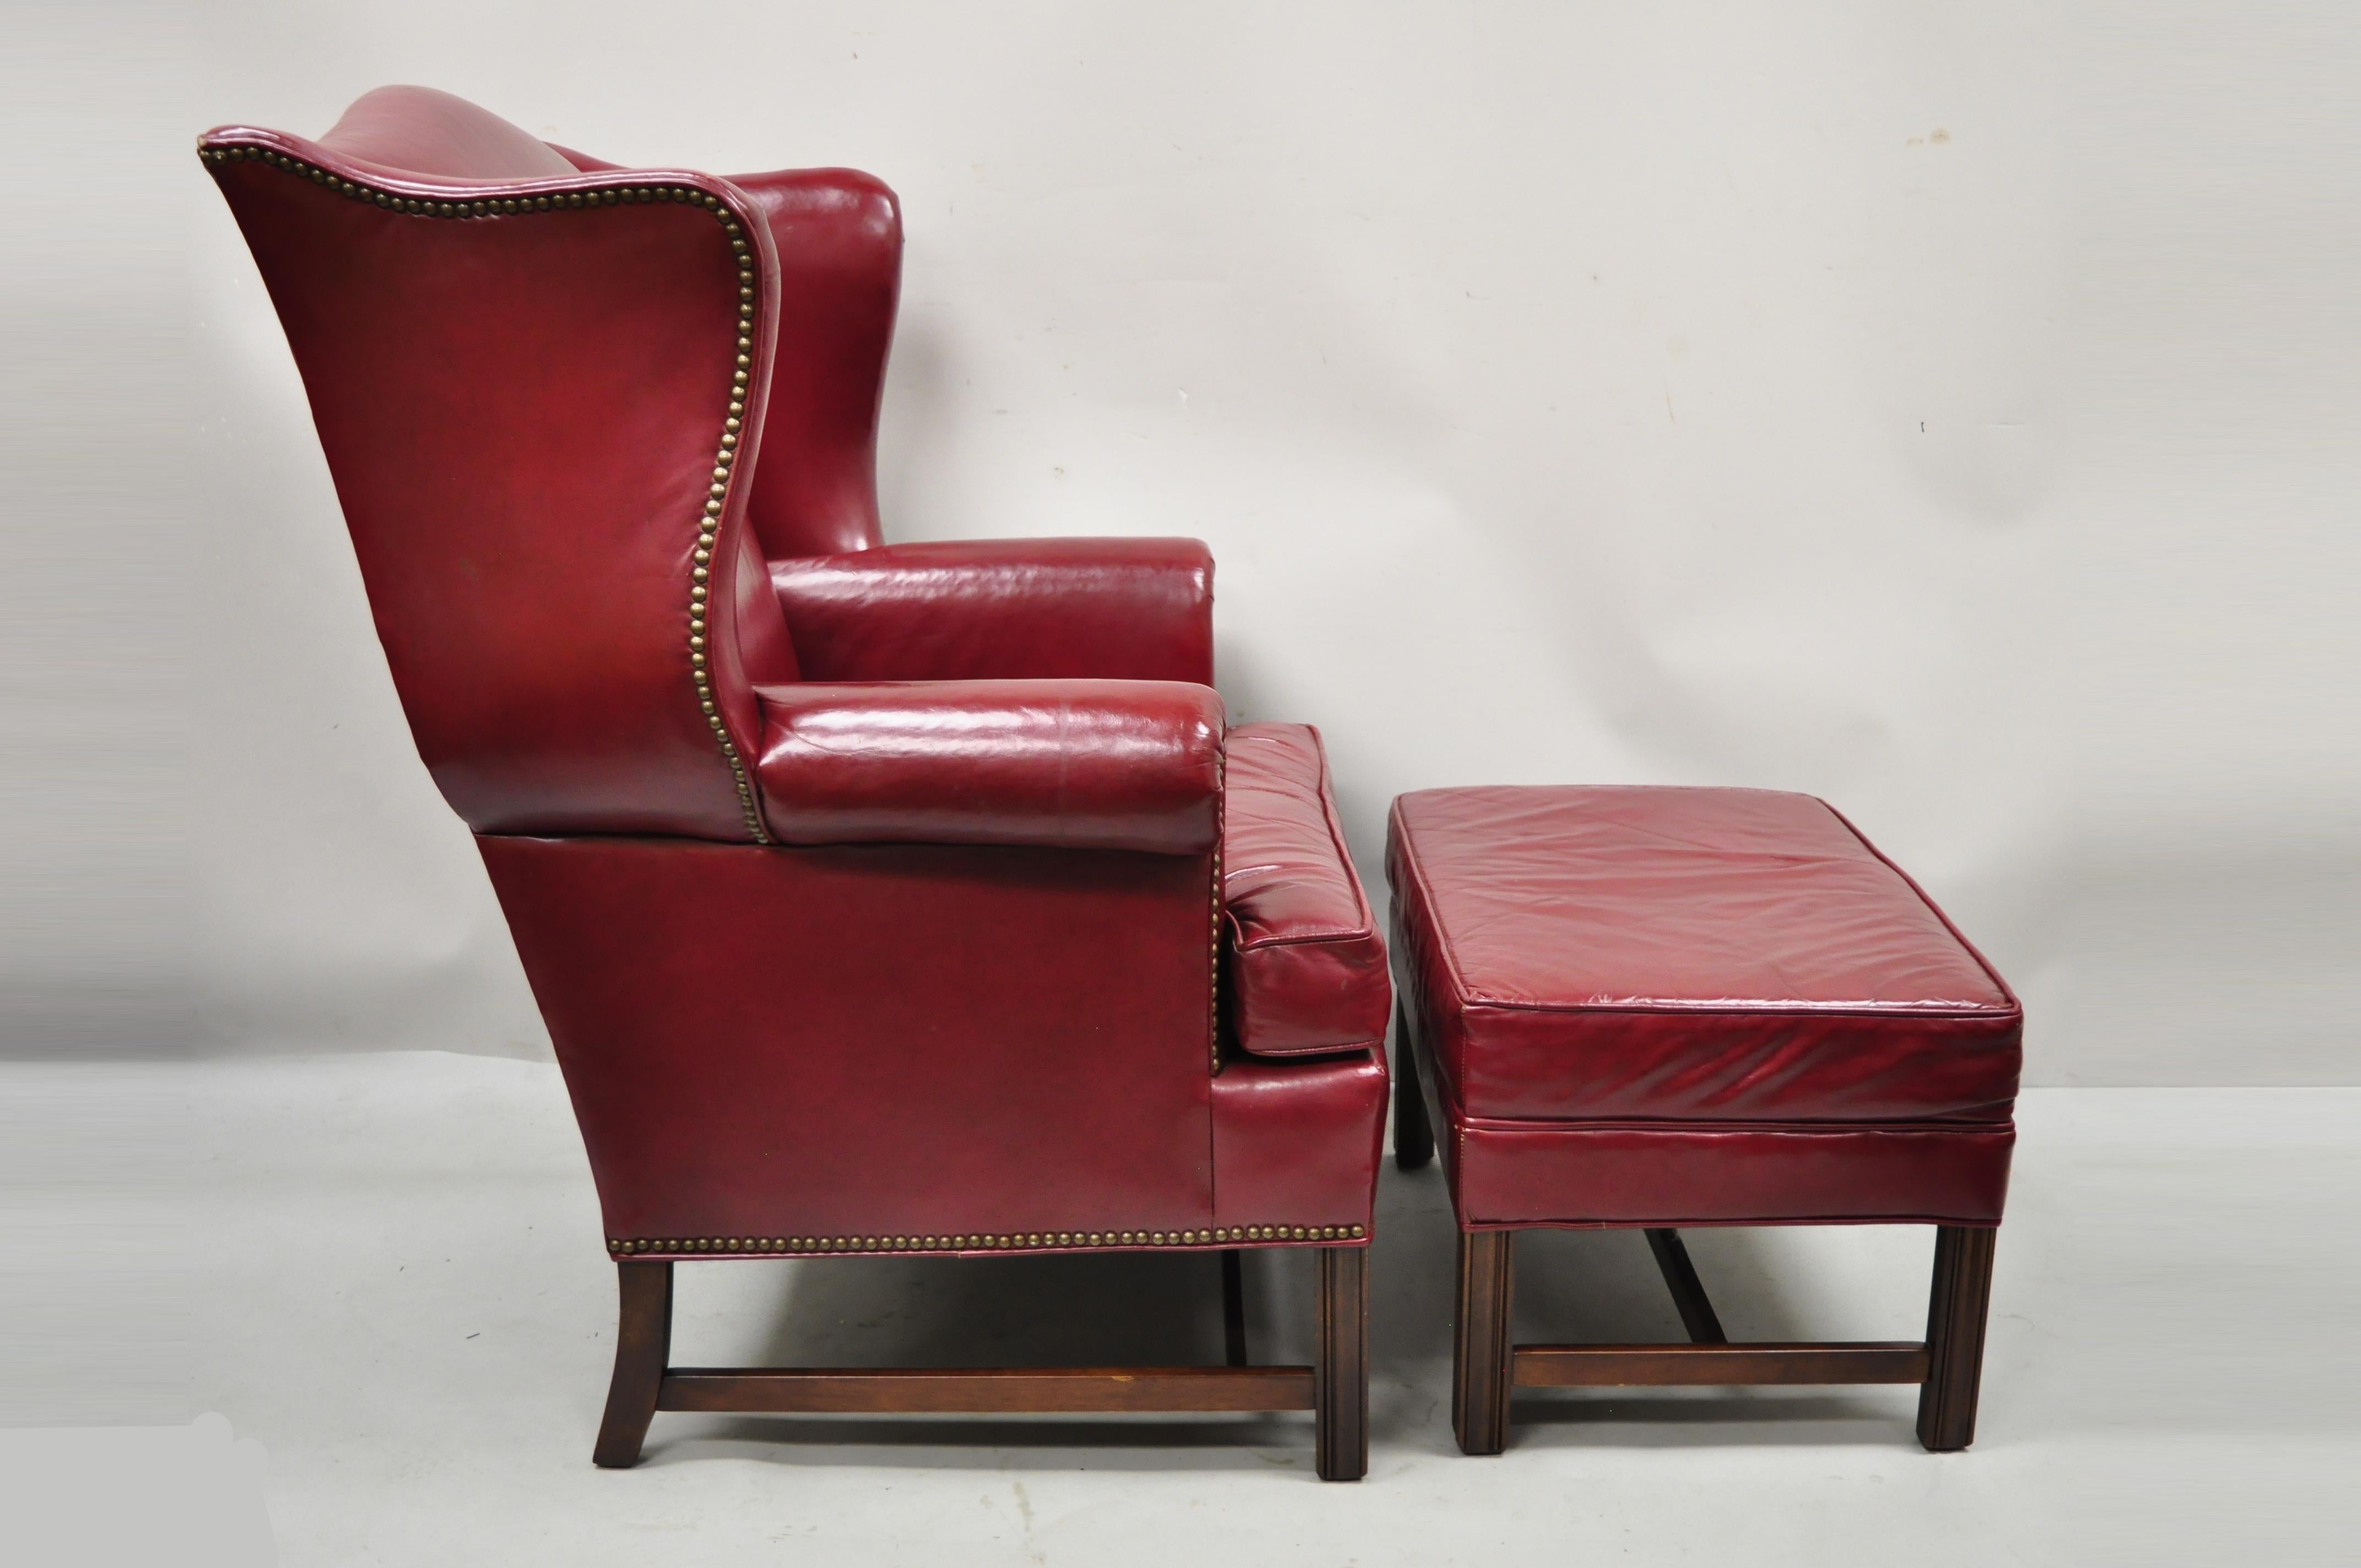 Vintage Ethan Allen English Georgian Burgundy red leather wingback lounge chair and ottoman. Item features high quality top Georgian leather upholstery, shapely wingback, stretcher base, nailhead trim, heavy solid wood construction, original label,